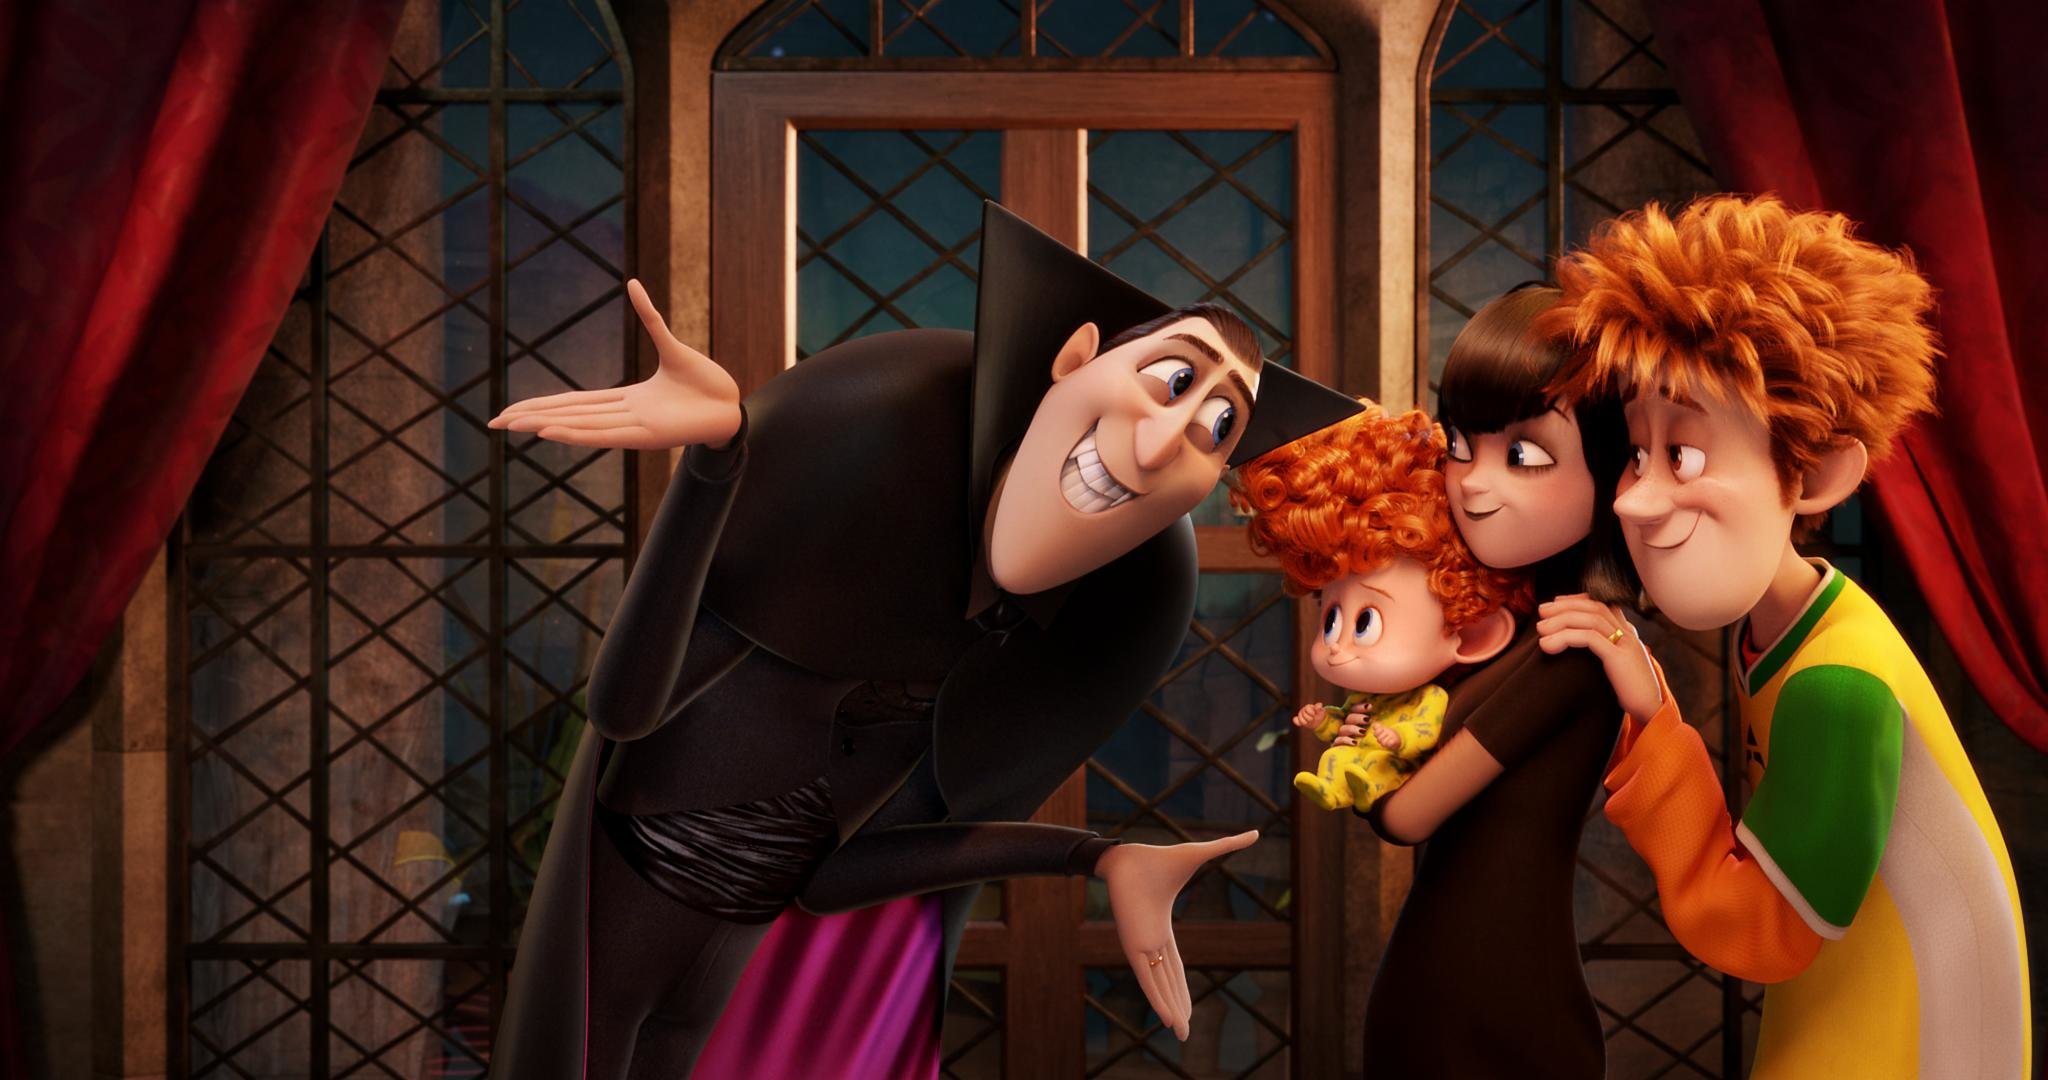 Hotel Transylvania 2 Wallpapers Hd For Desktop Backgrounds